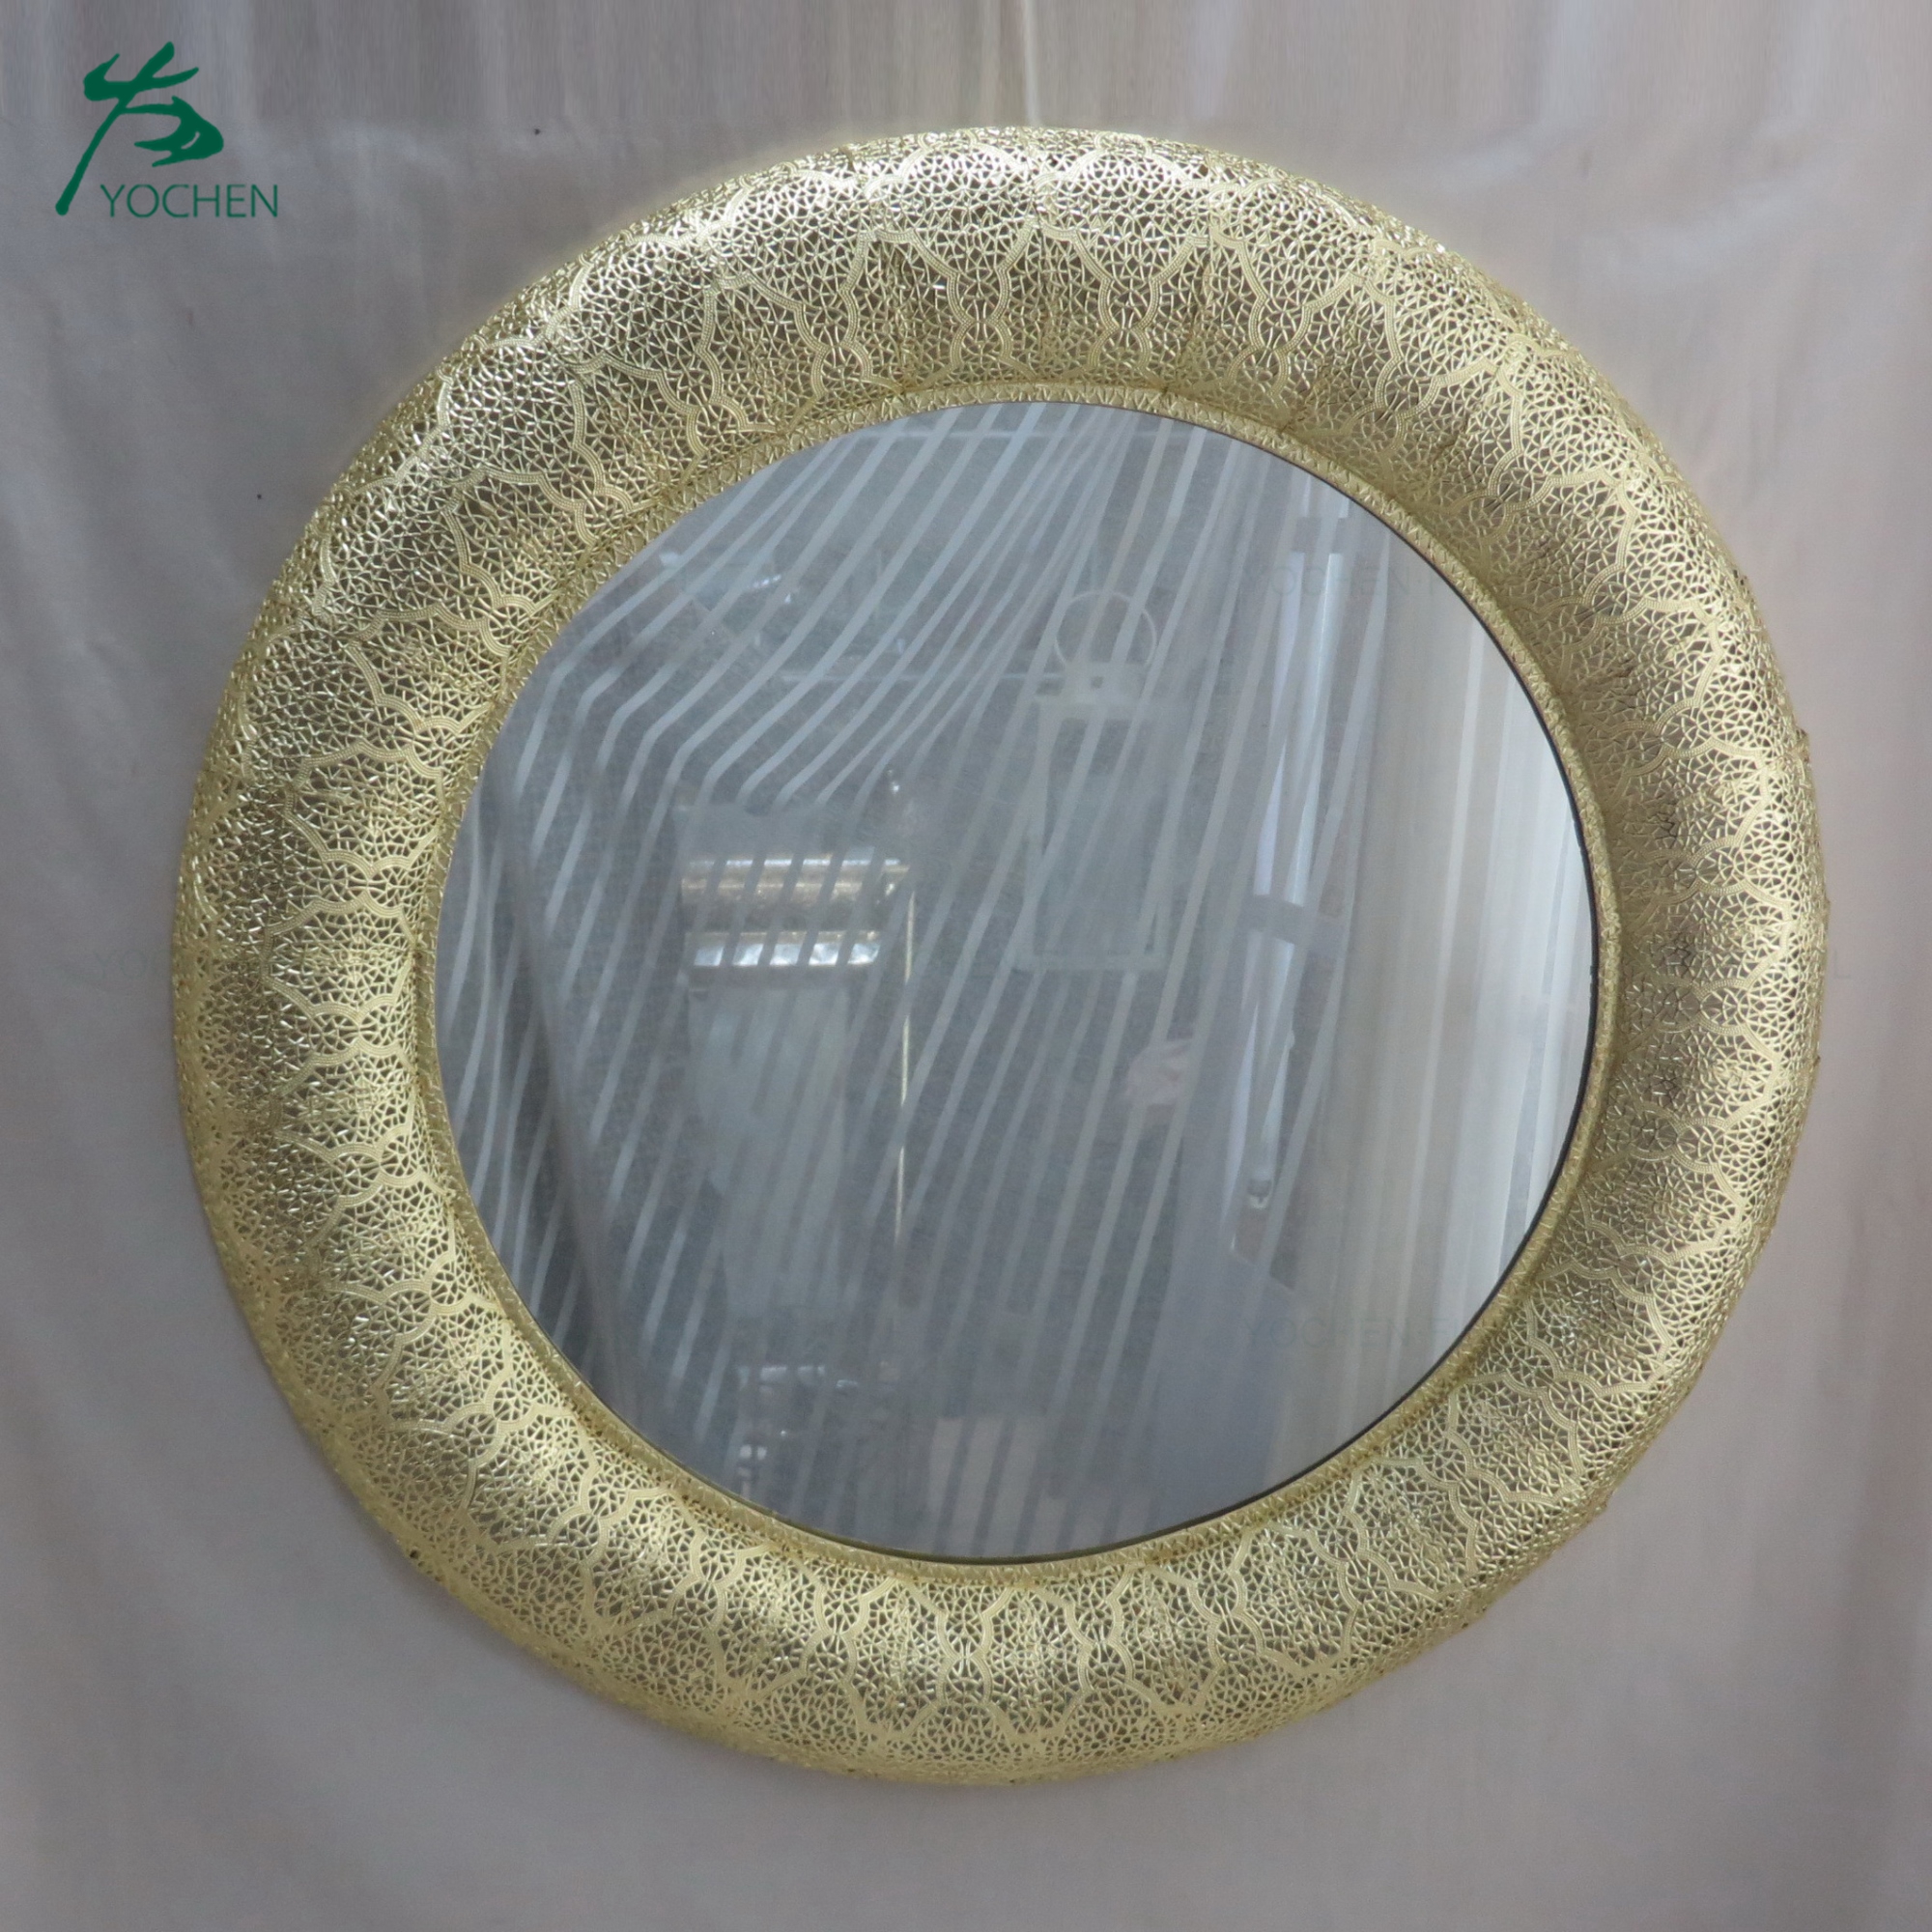 Antique Style Ornate Heart Large Wall Mirror